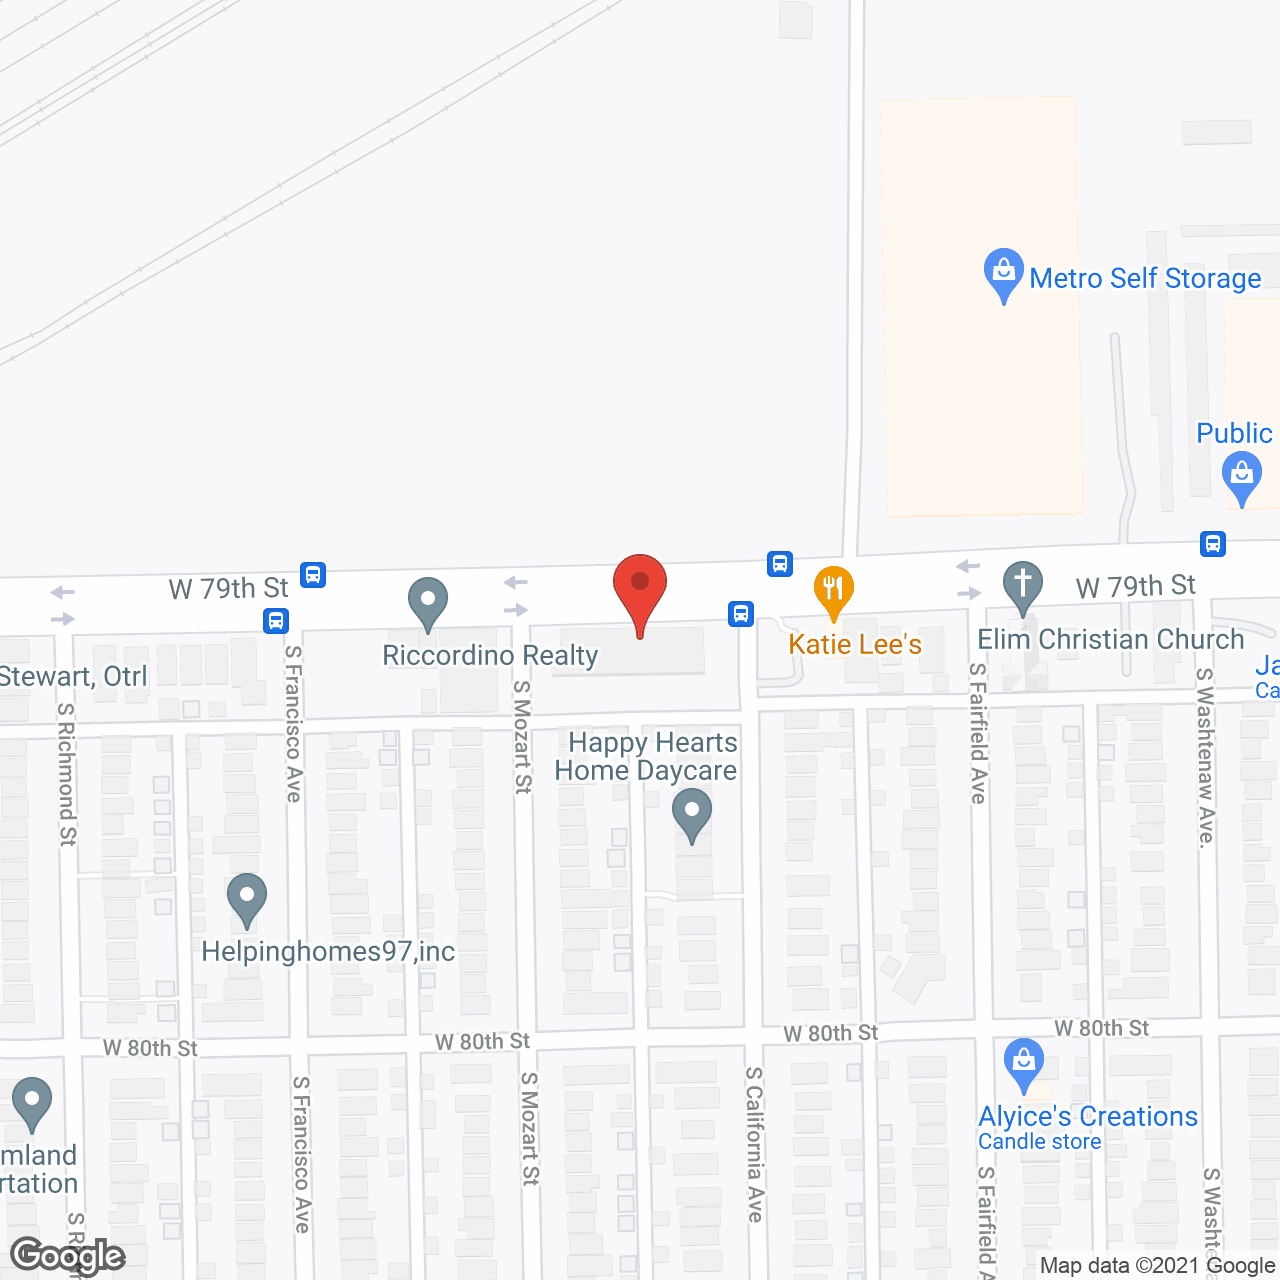 Wrightwood Senior Apartments in google map